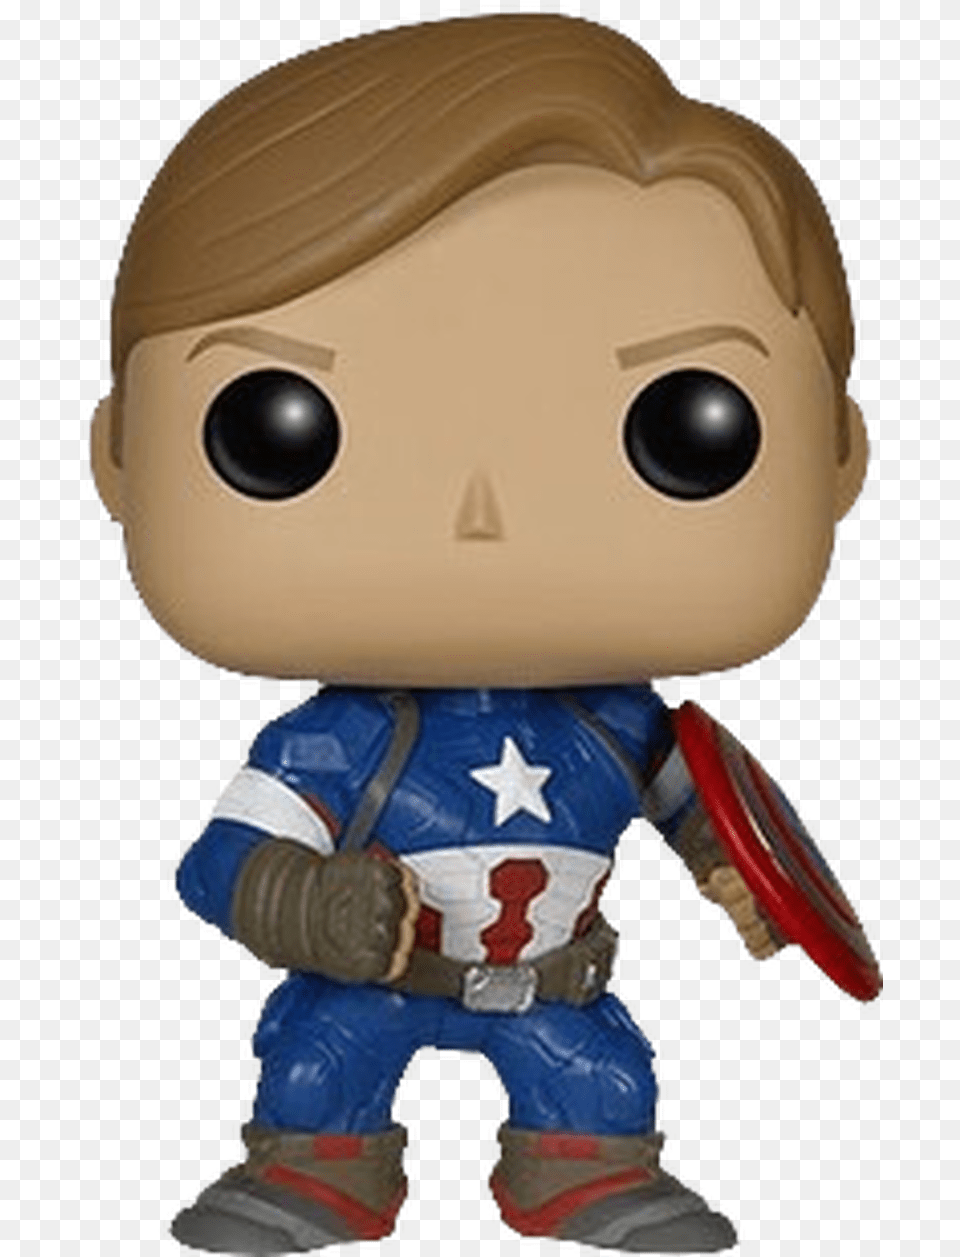 Captain America Unmasked Exclusive Breakfast Club Funko Pops, Baby, Person, Toy, Vr Headset Free Png